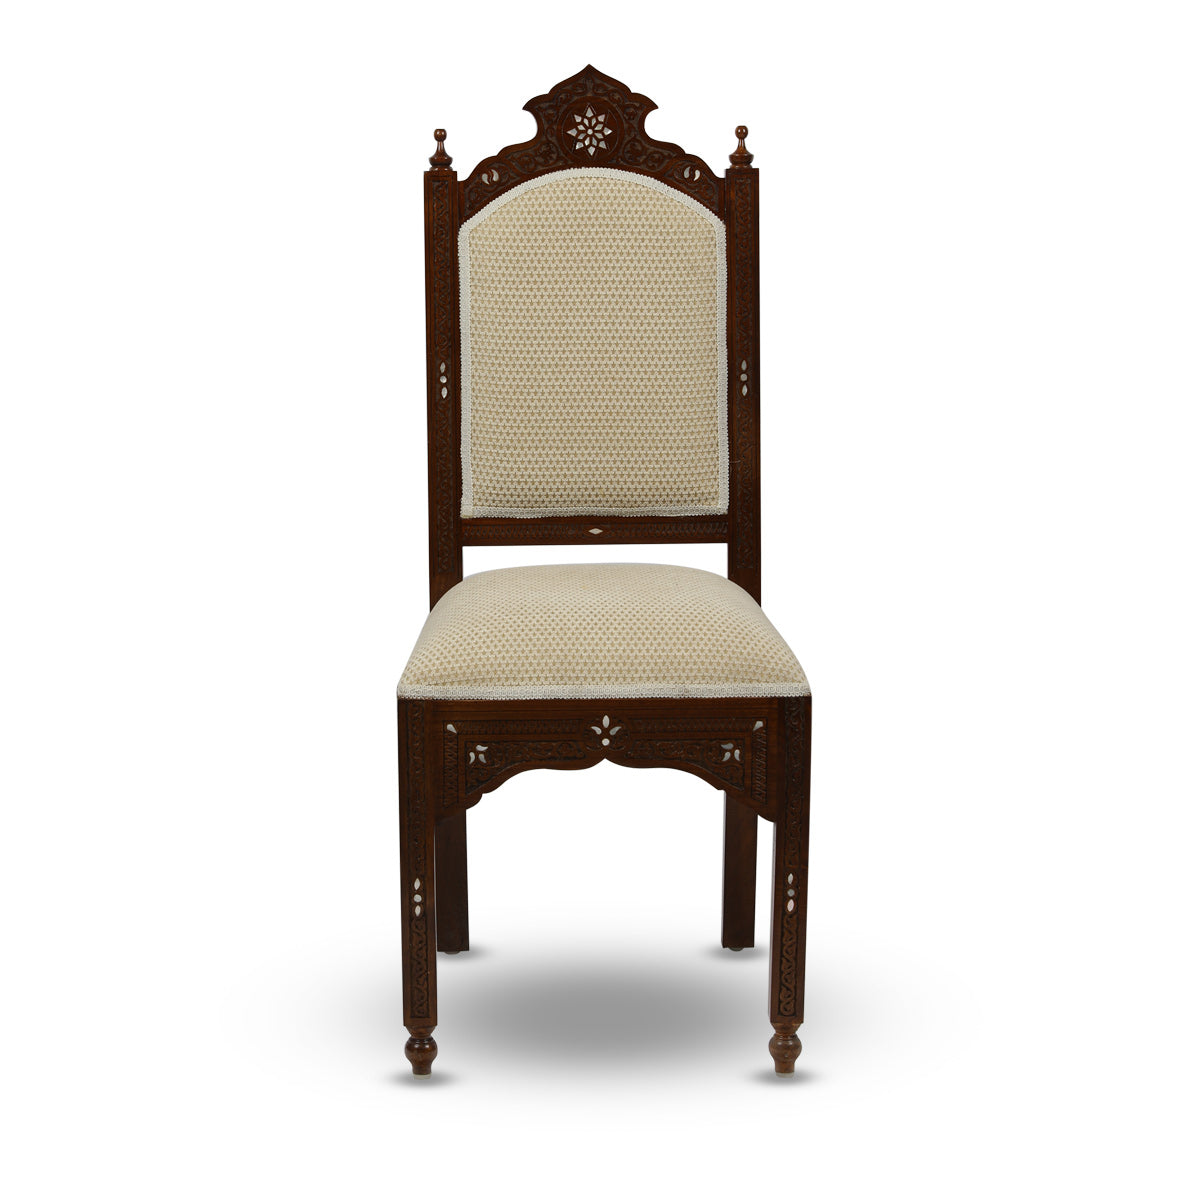 Front View of Upholstered Sleek Modern Wooden Chair